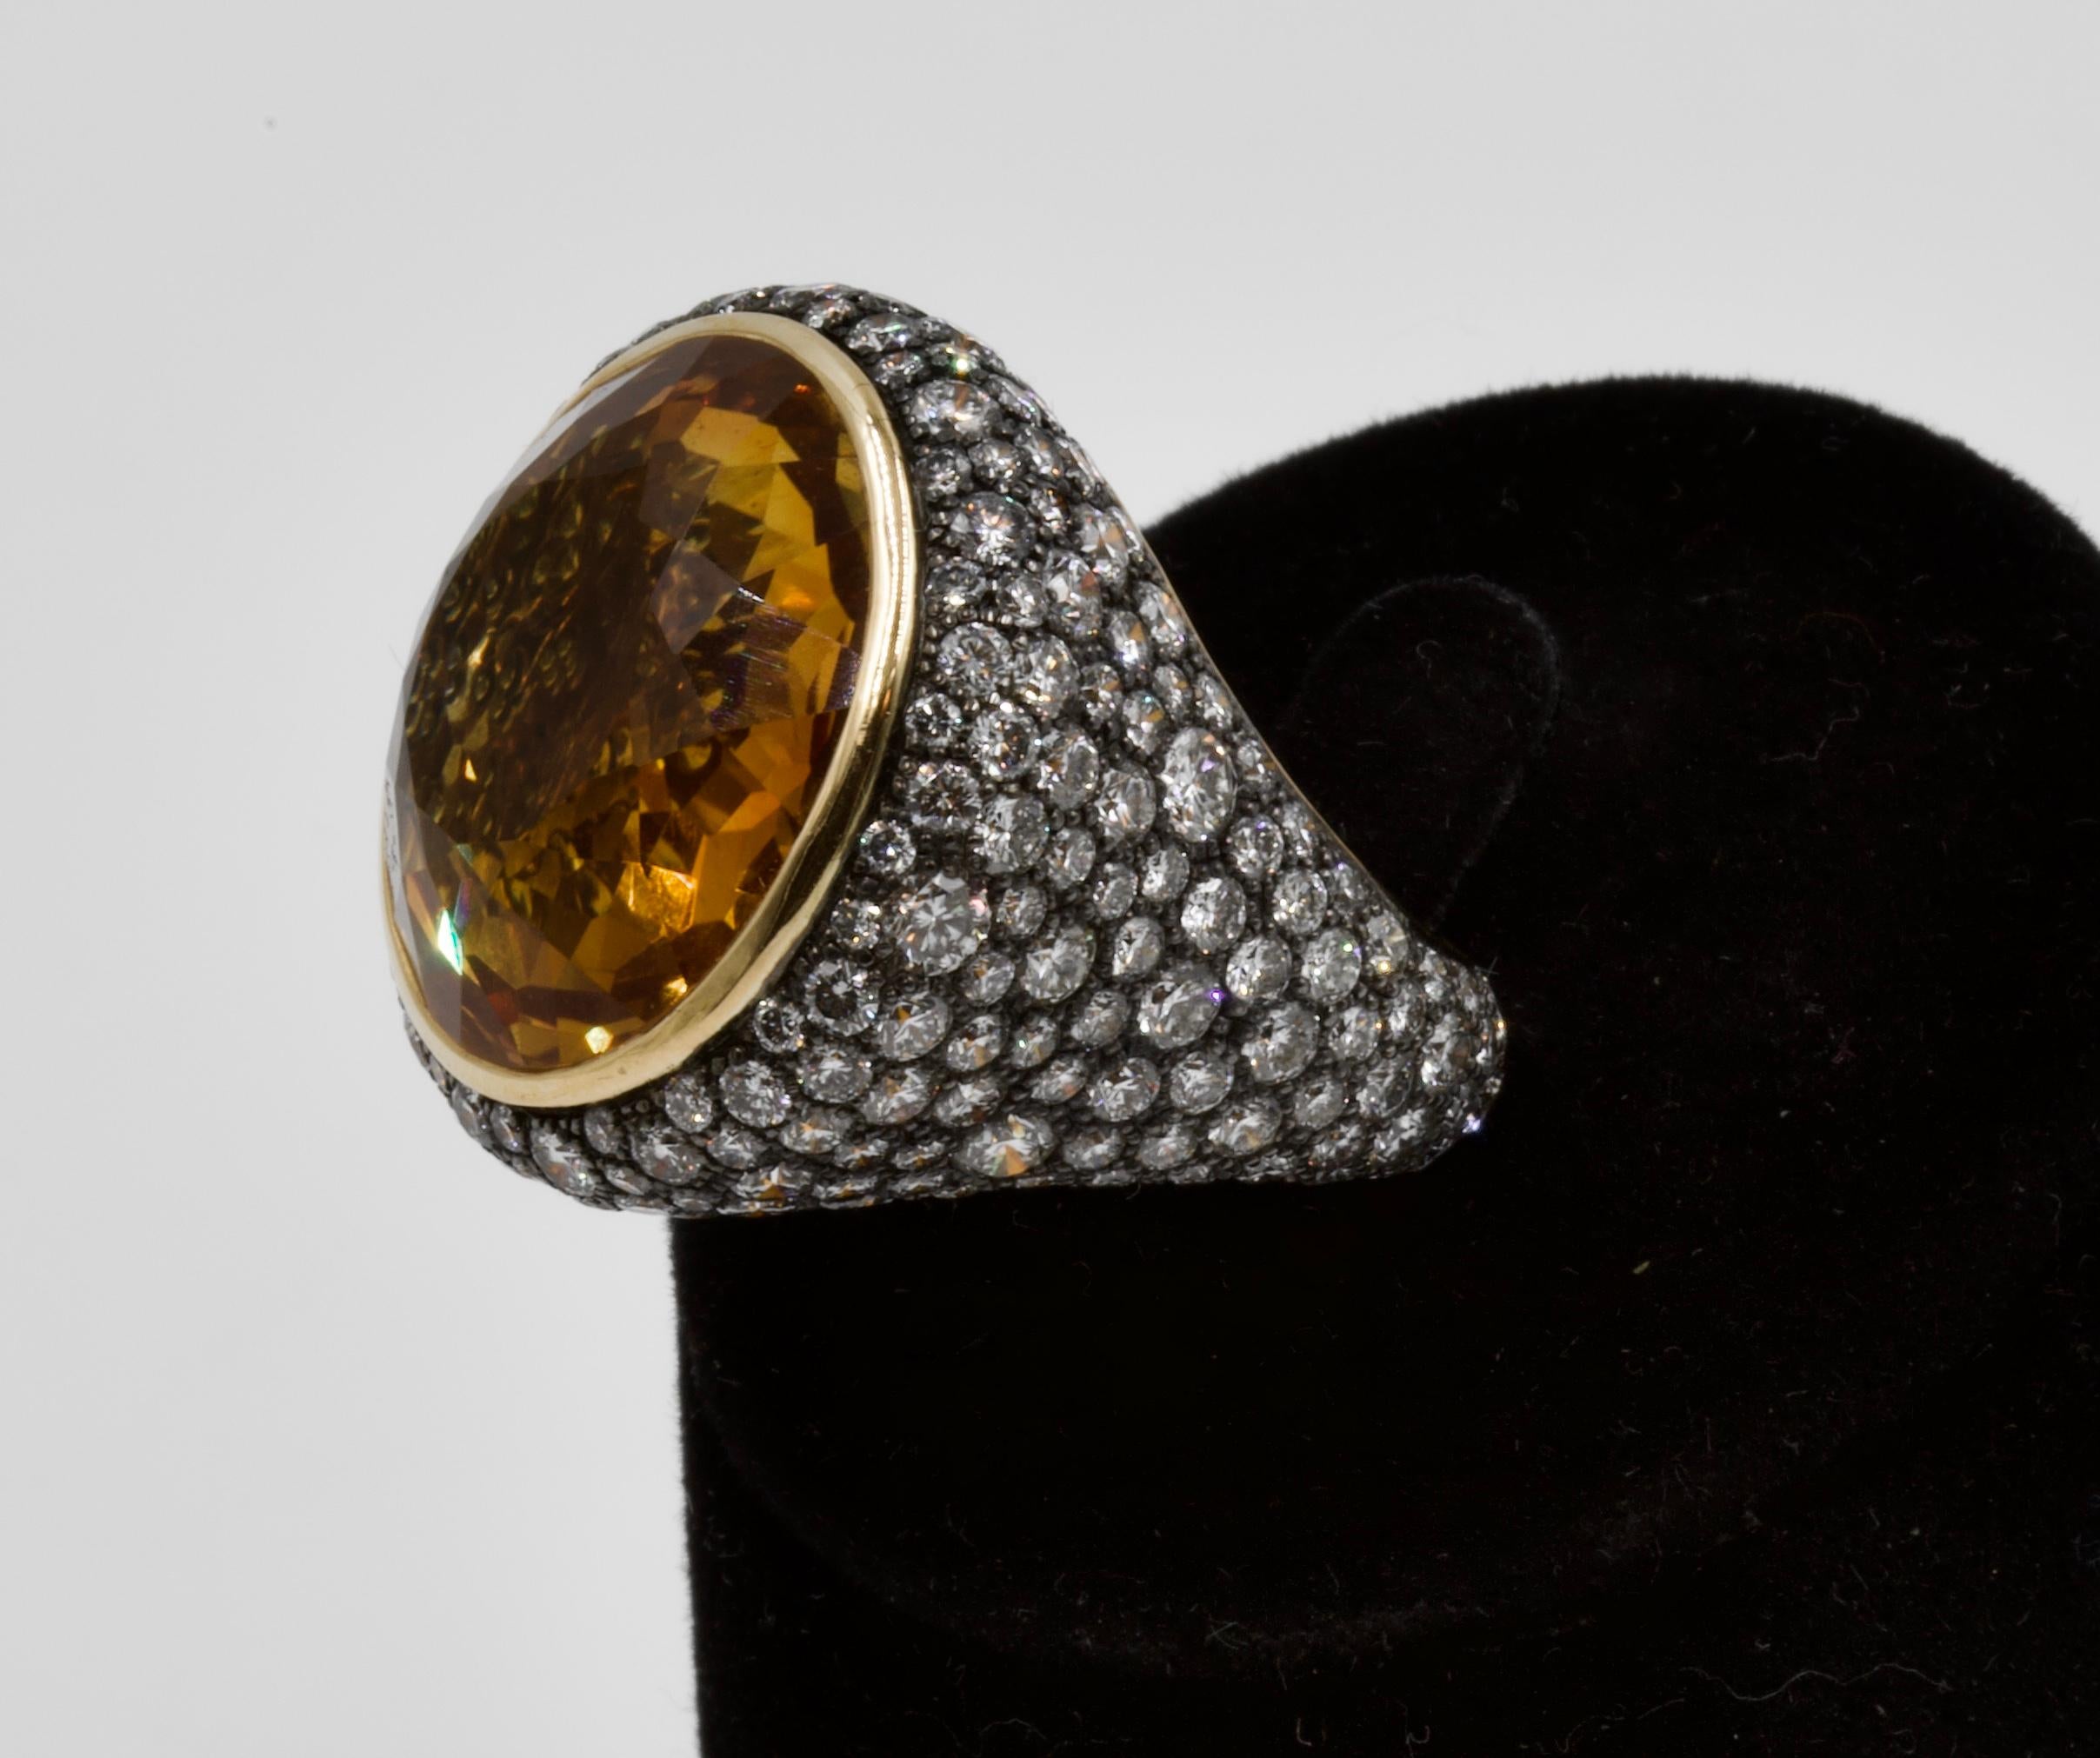 Exceptional Seaman Schepps Vintage Citrine and Diamonds Cocktail Ring at Second Petale Gallery

18k yellow and black gold (French mark)
Circular-cut citrine, approx. 19-22 ct. 
Diamonds approx. 12-14 ct. 
Signed and numbered.
Size: 53
Weight : 17,53